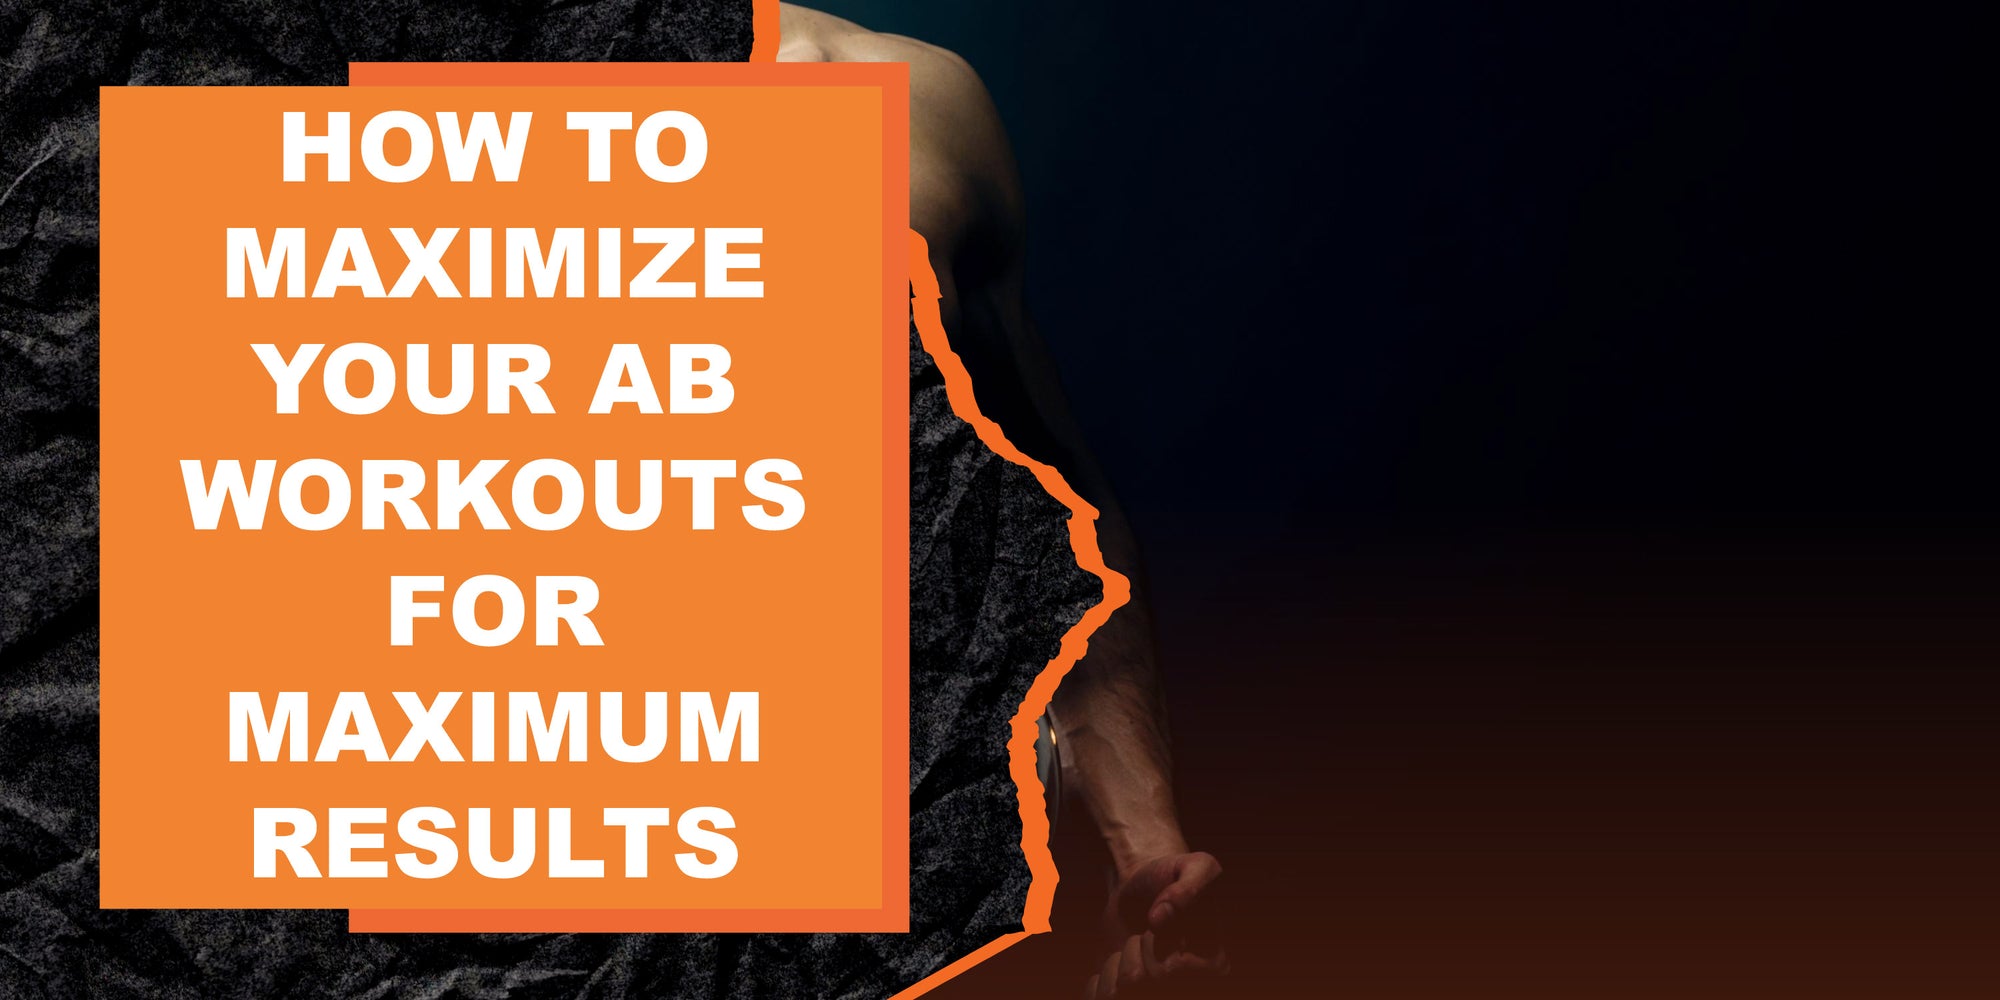 How to Maximize Your Ab Workouts for Maximum Results